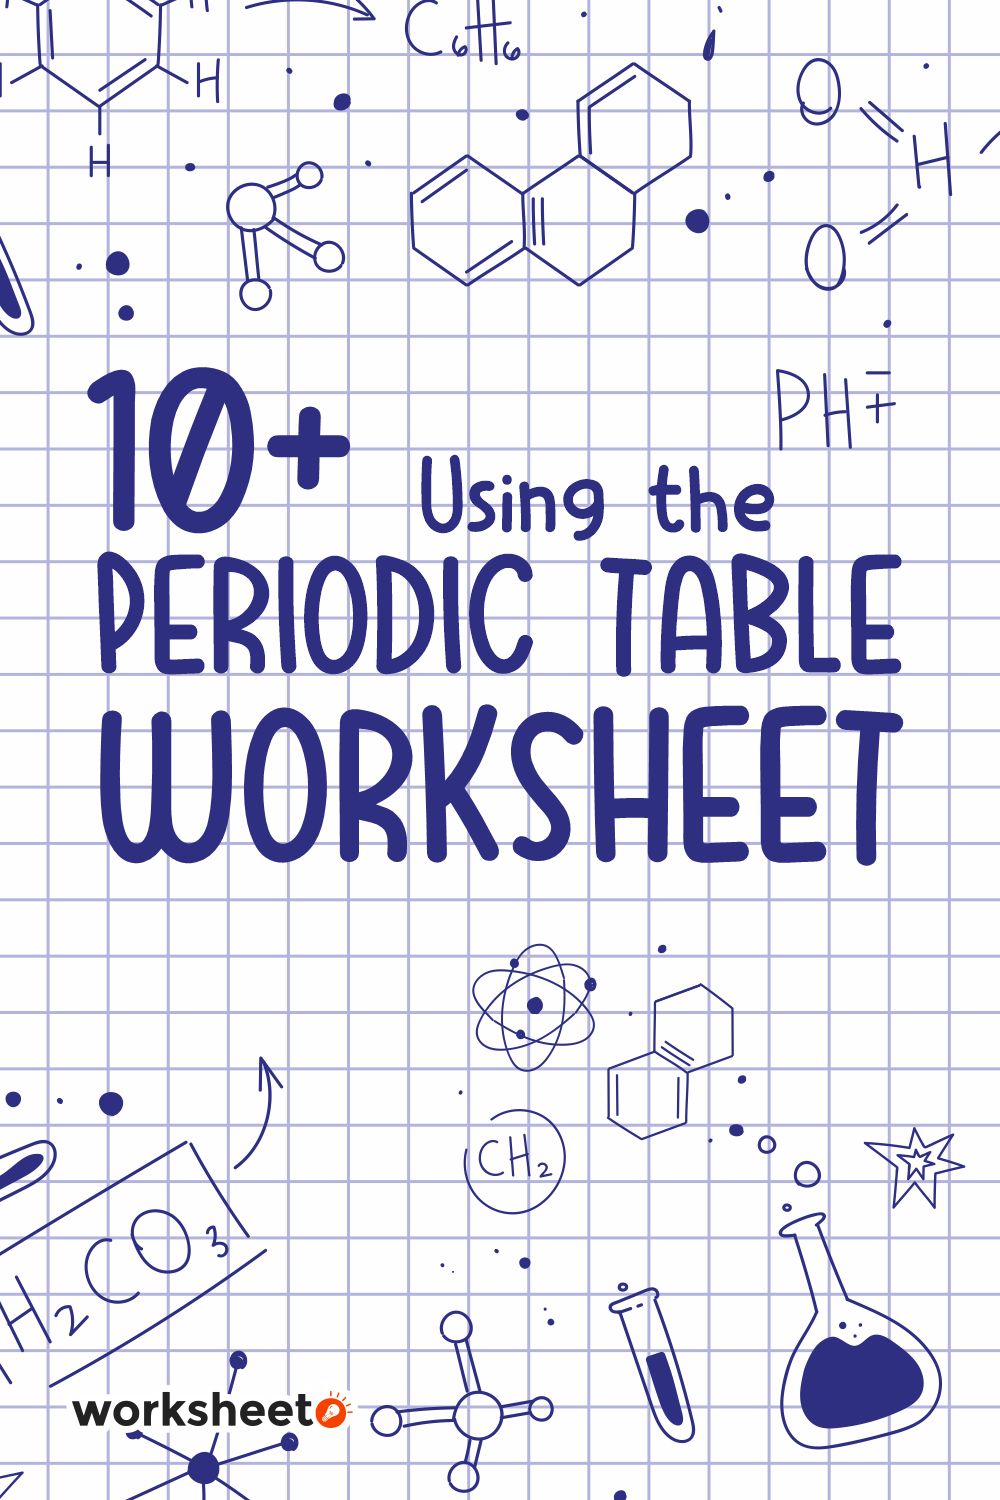 18 Images of Using The Periodic Table Worksheet